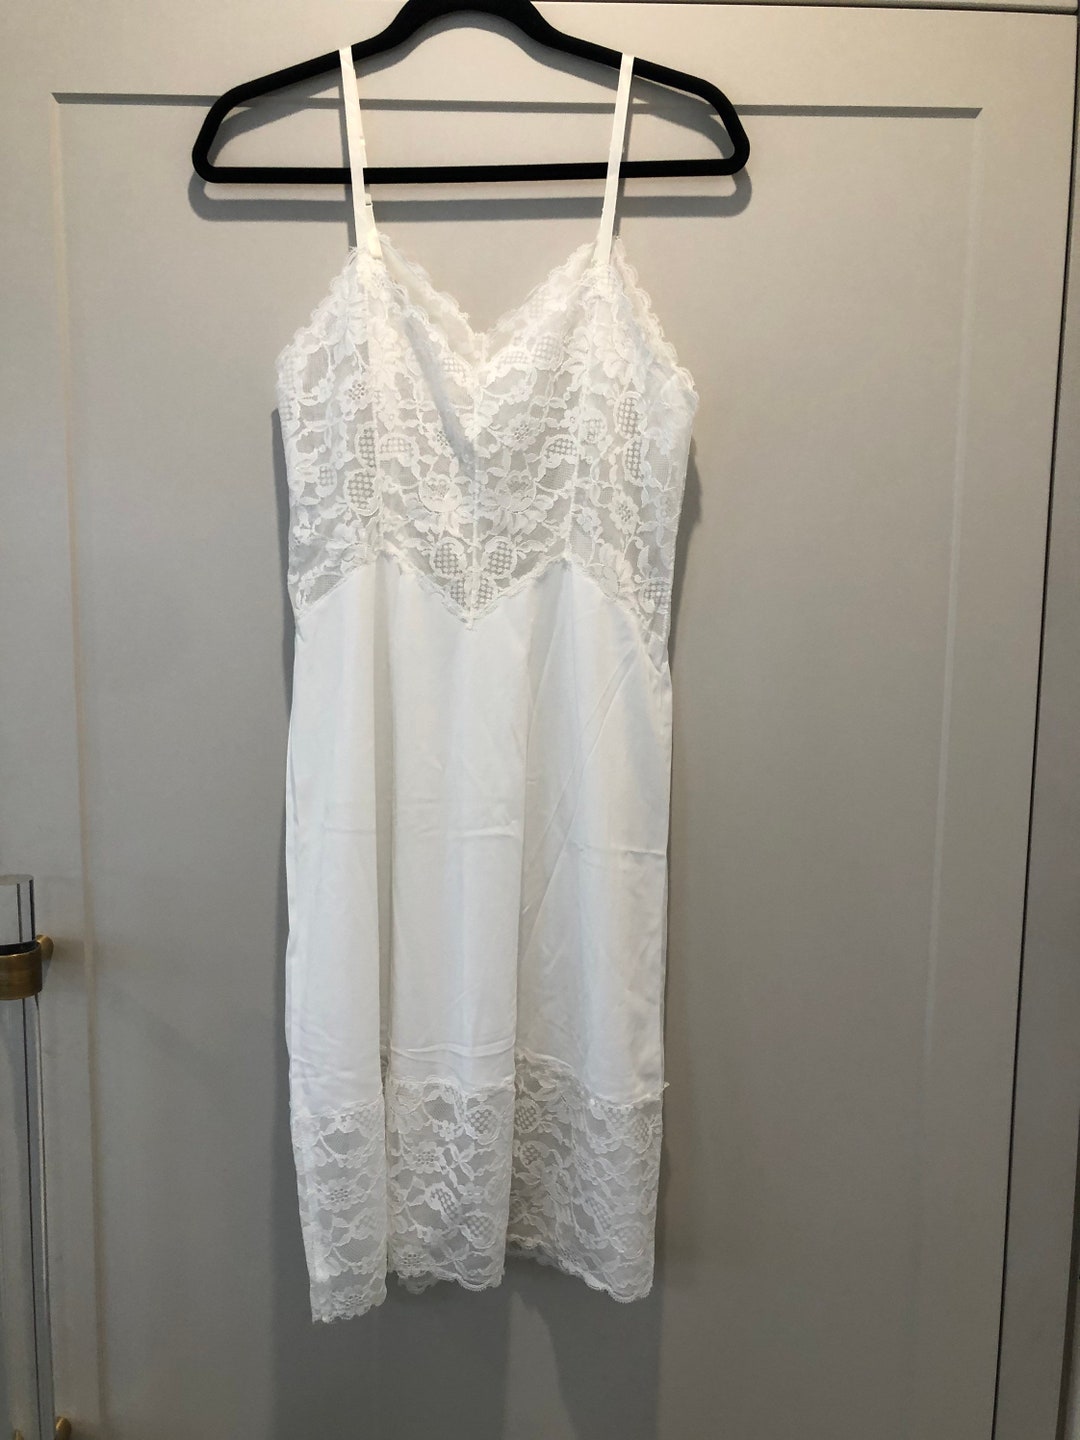 Ladies Vintage Dress Slip With Lace Size 36 - Etsy